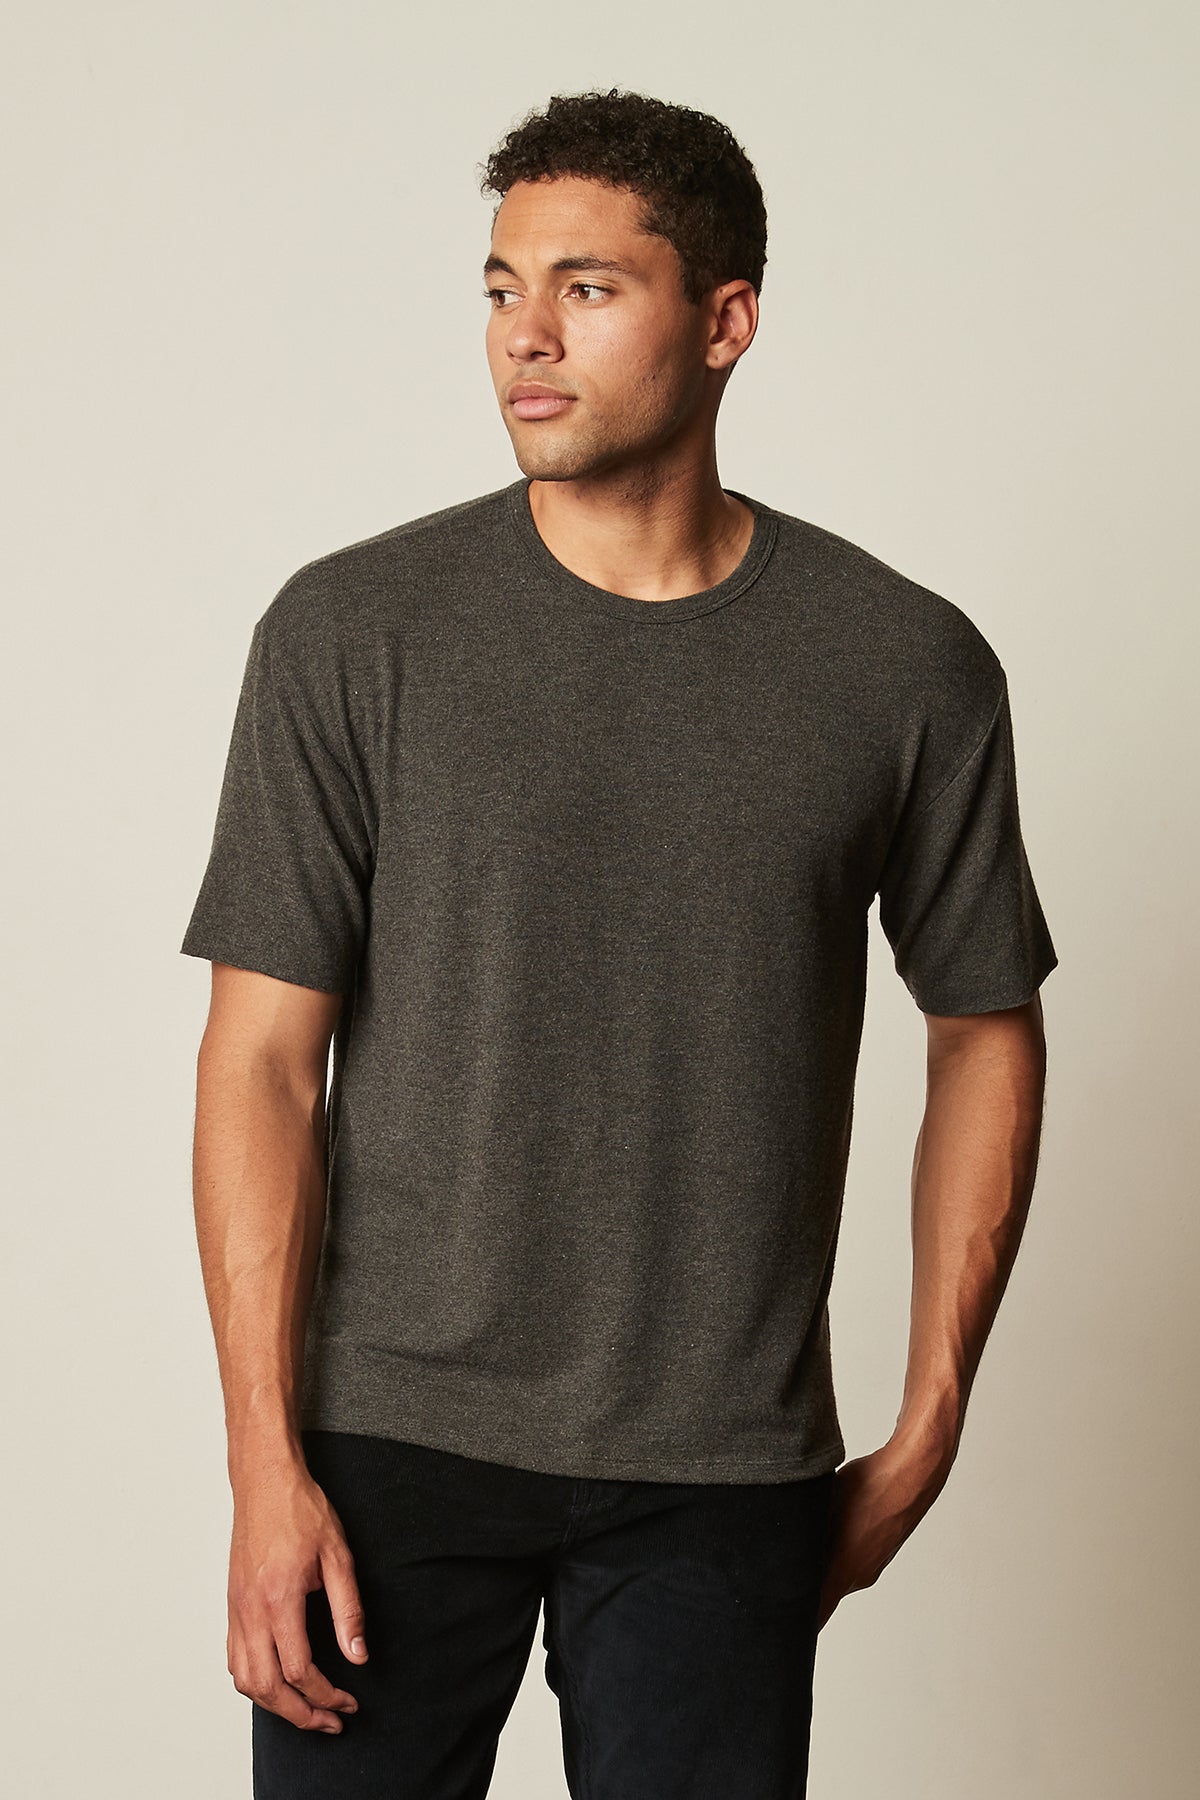   Newall crew neck shirt in dark heathered grey anthracite color front 